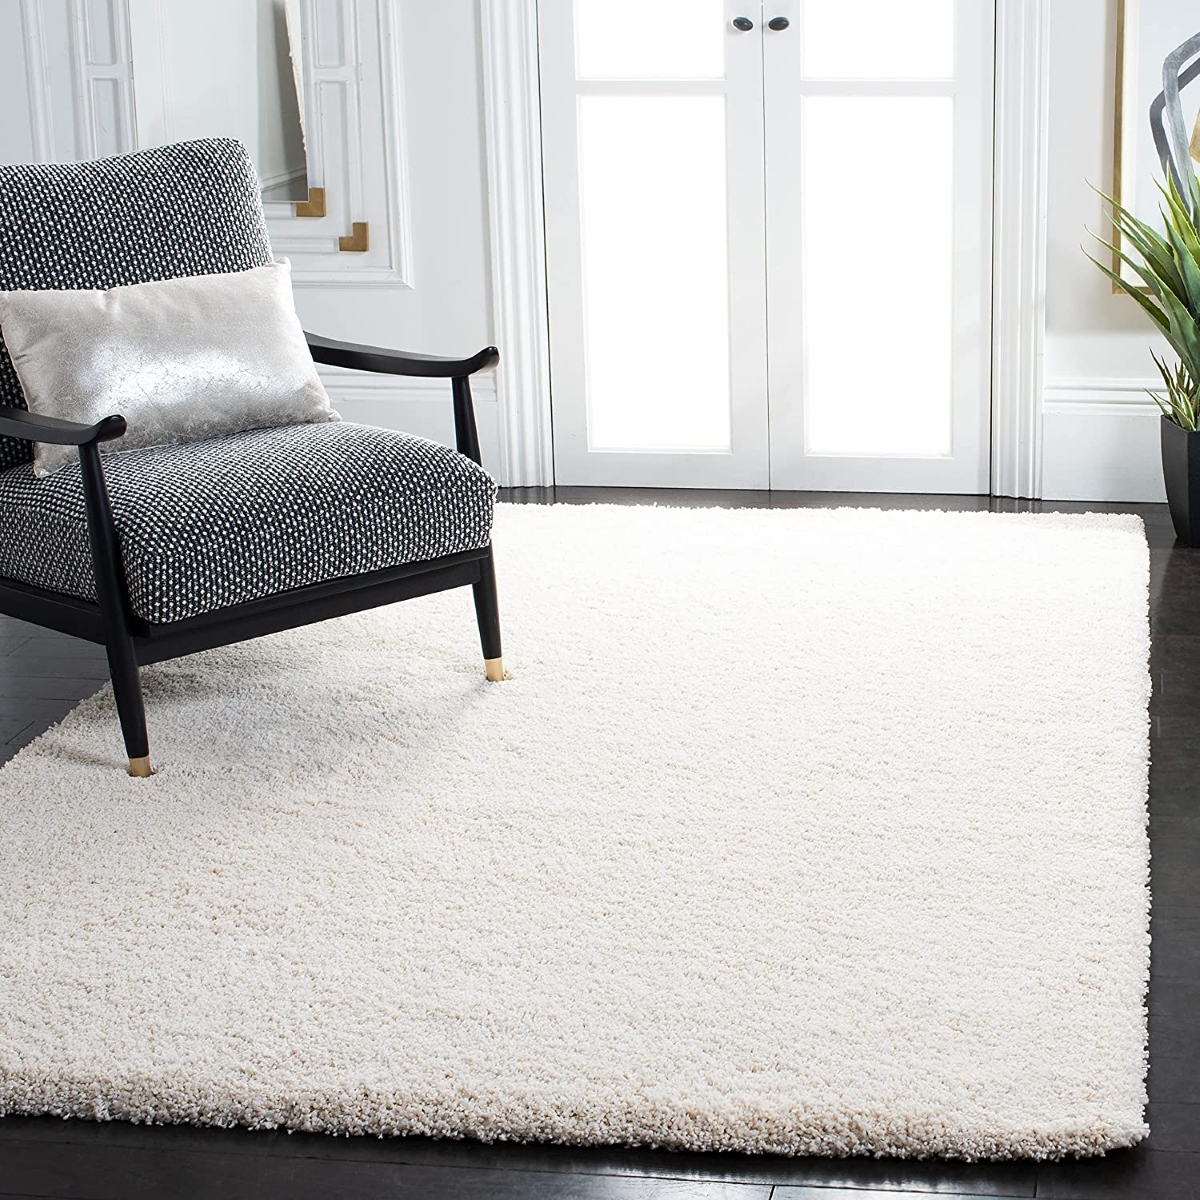 types of rugs - white rug